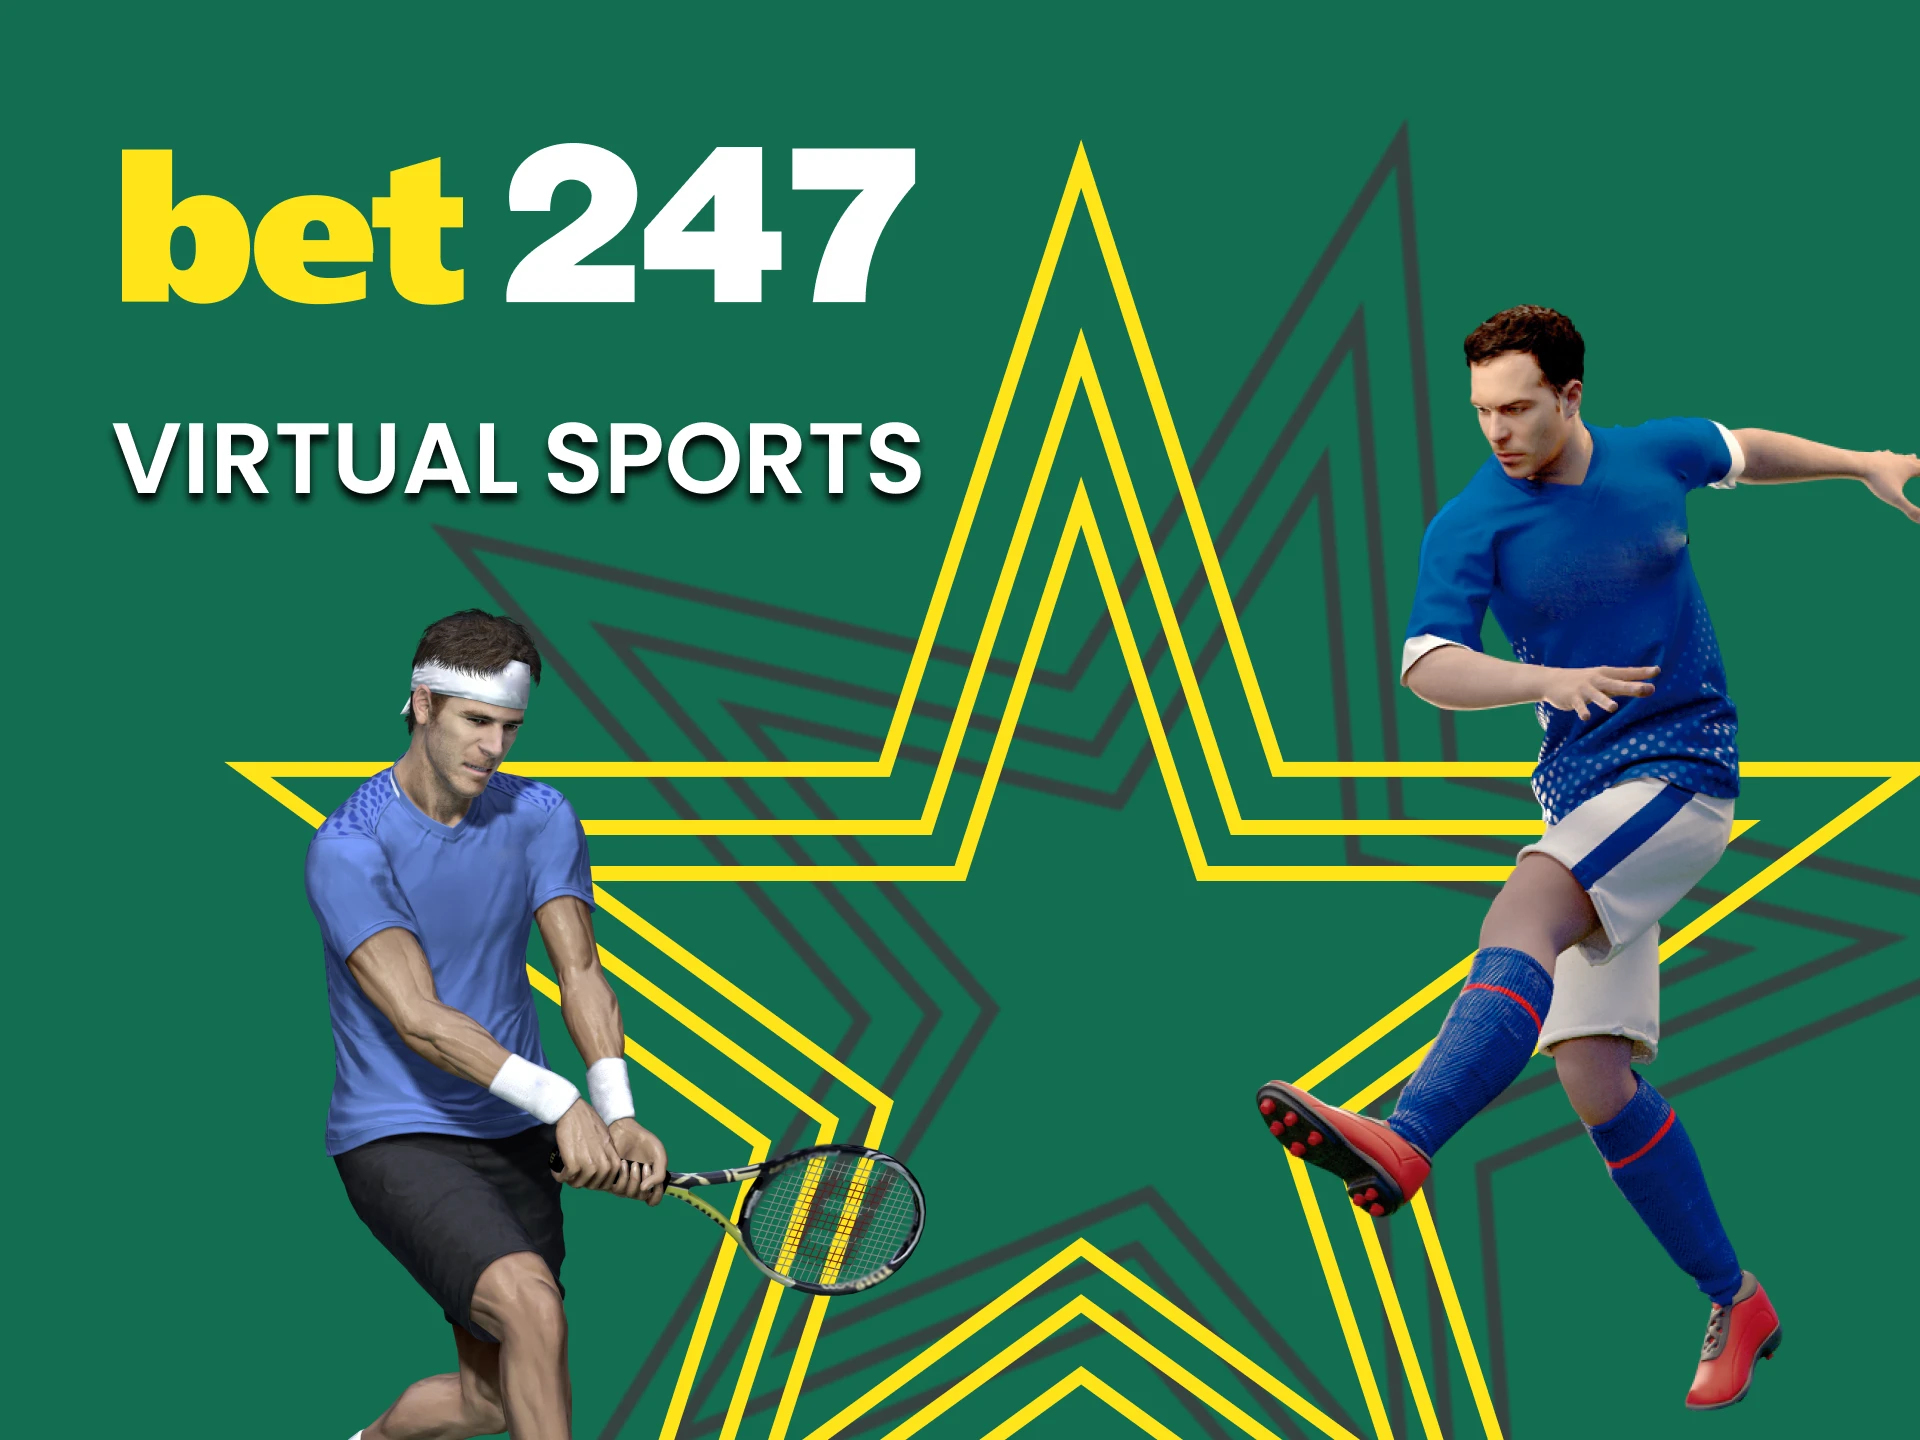 Bet on virtual sports with Bet247.